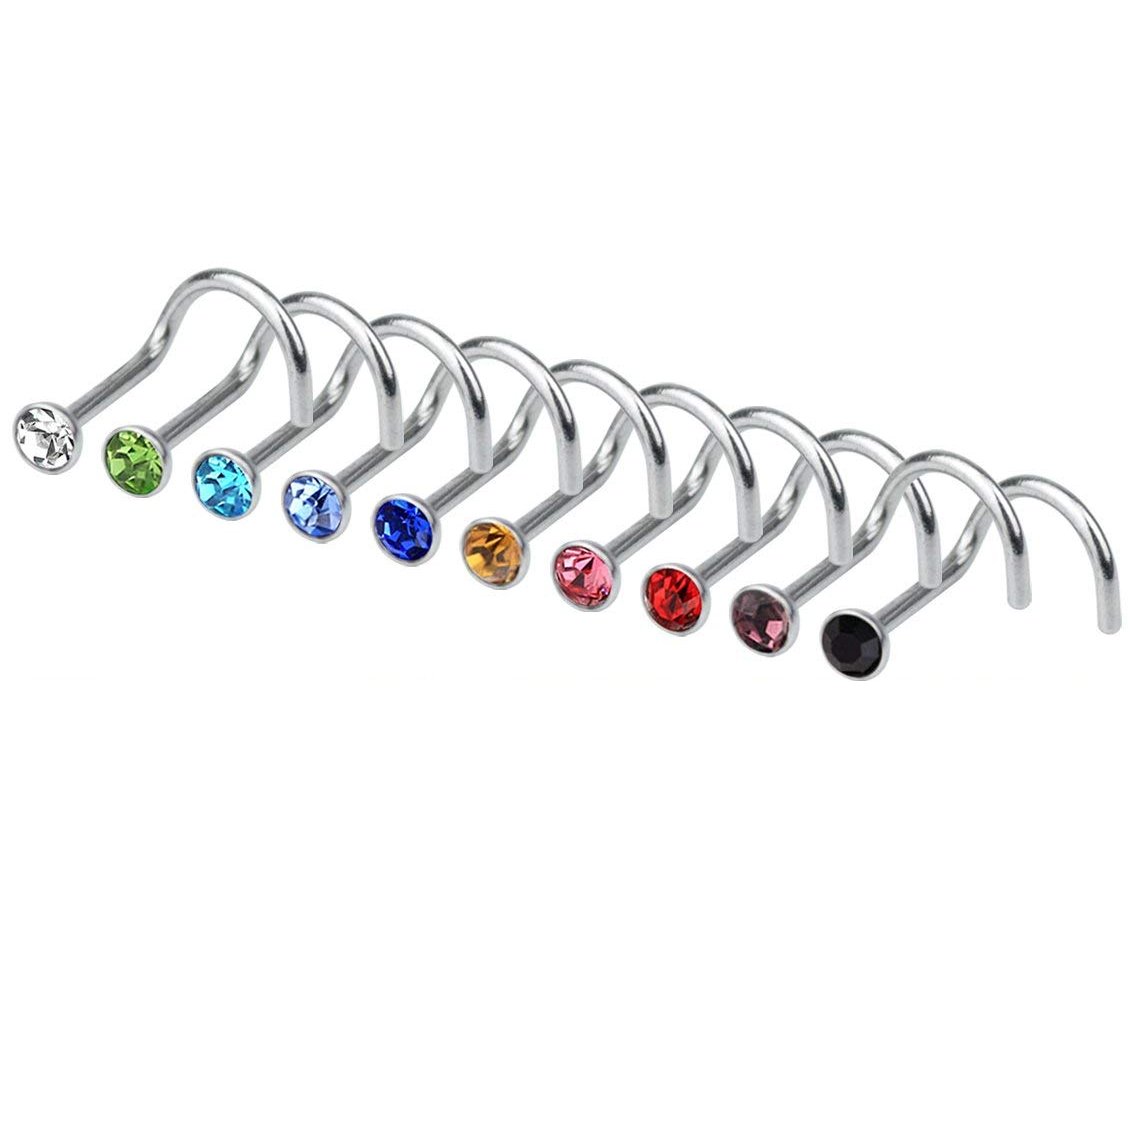 Rbenxia 20G 316L Nose Studs Rings 2.2MM Rhinestone Stainless Steel Nose Body Piercing Rings 10 Pcs Random Color for Unisex